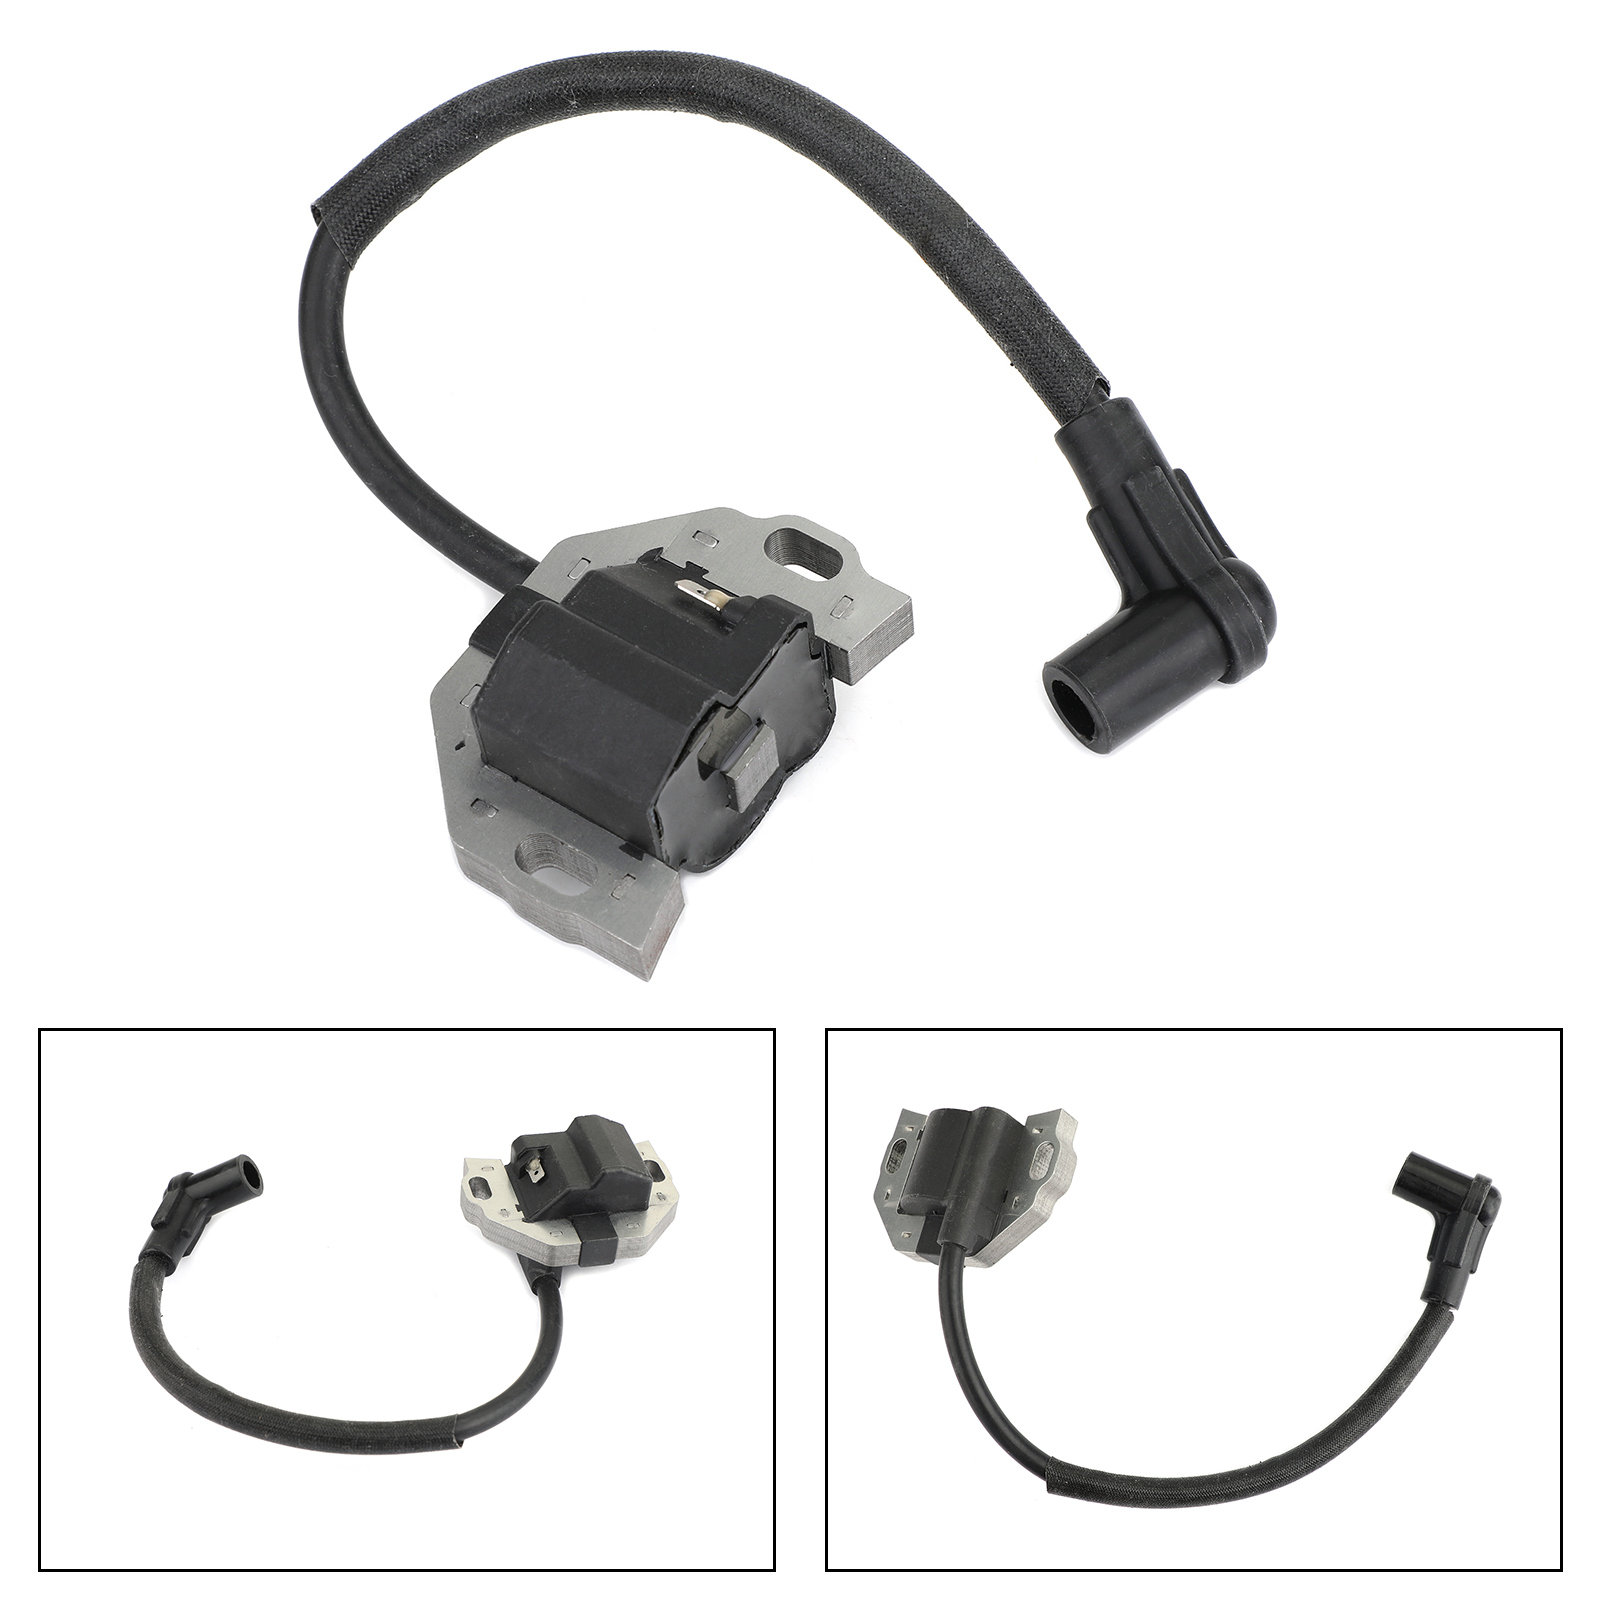 Motor Genic Ignition Coil Fit For Kawasaki 21171-0745 21171-0742 21171-7039 ZF-IG-A00135 - image 1 of 9